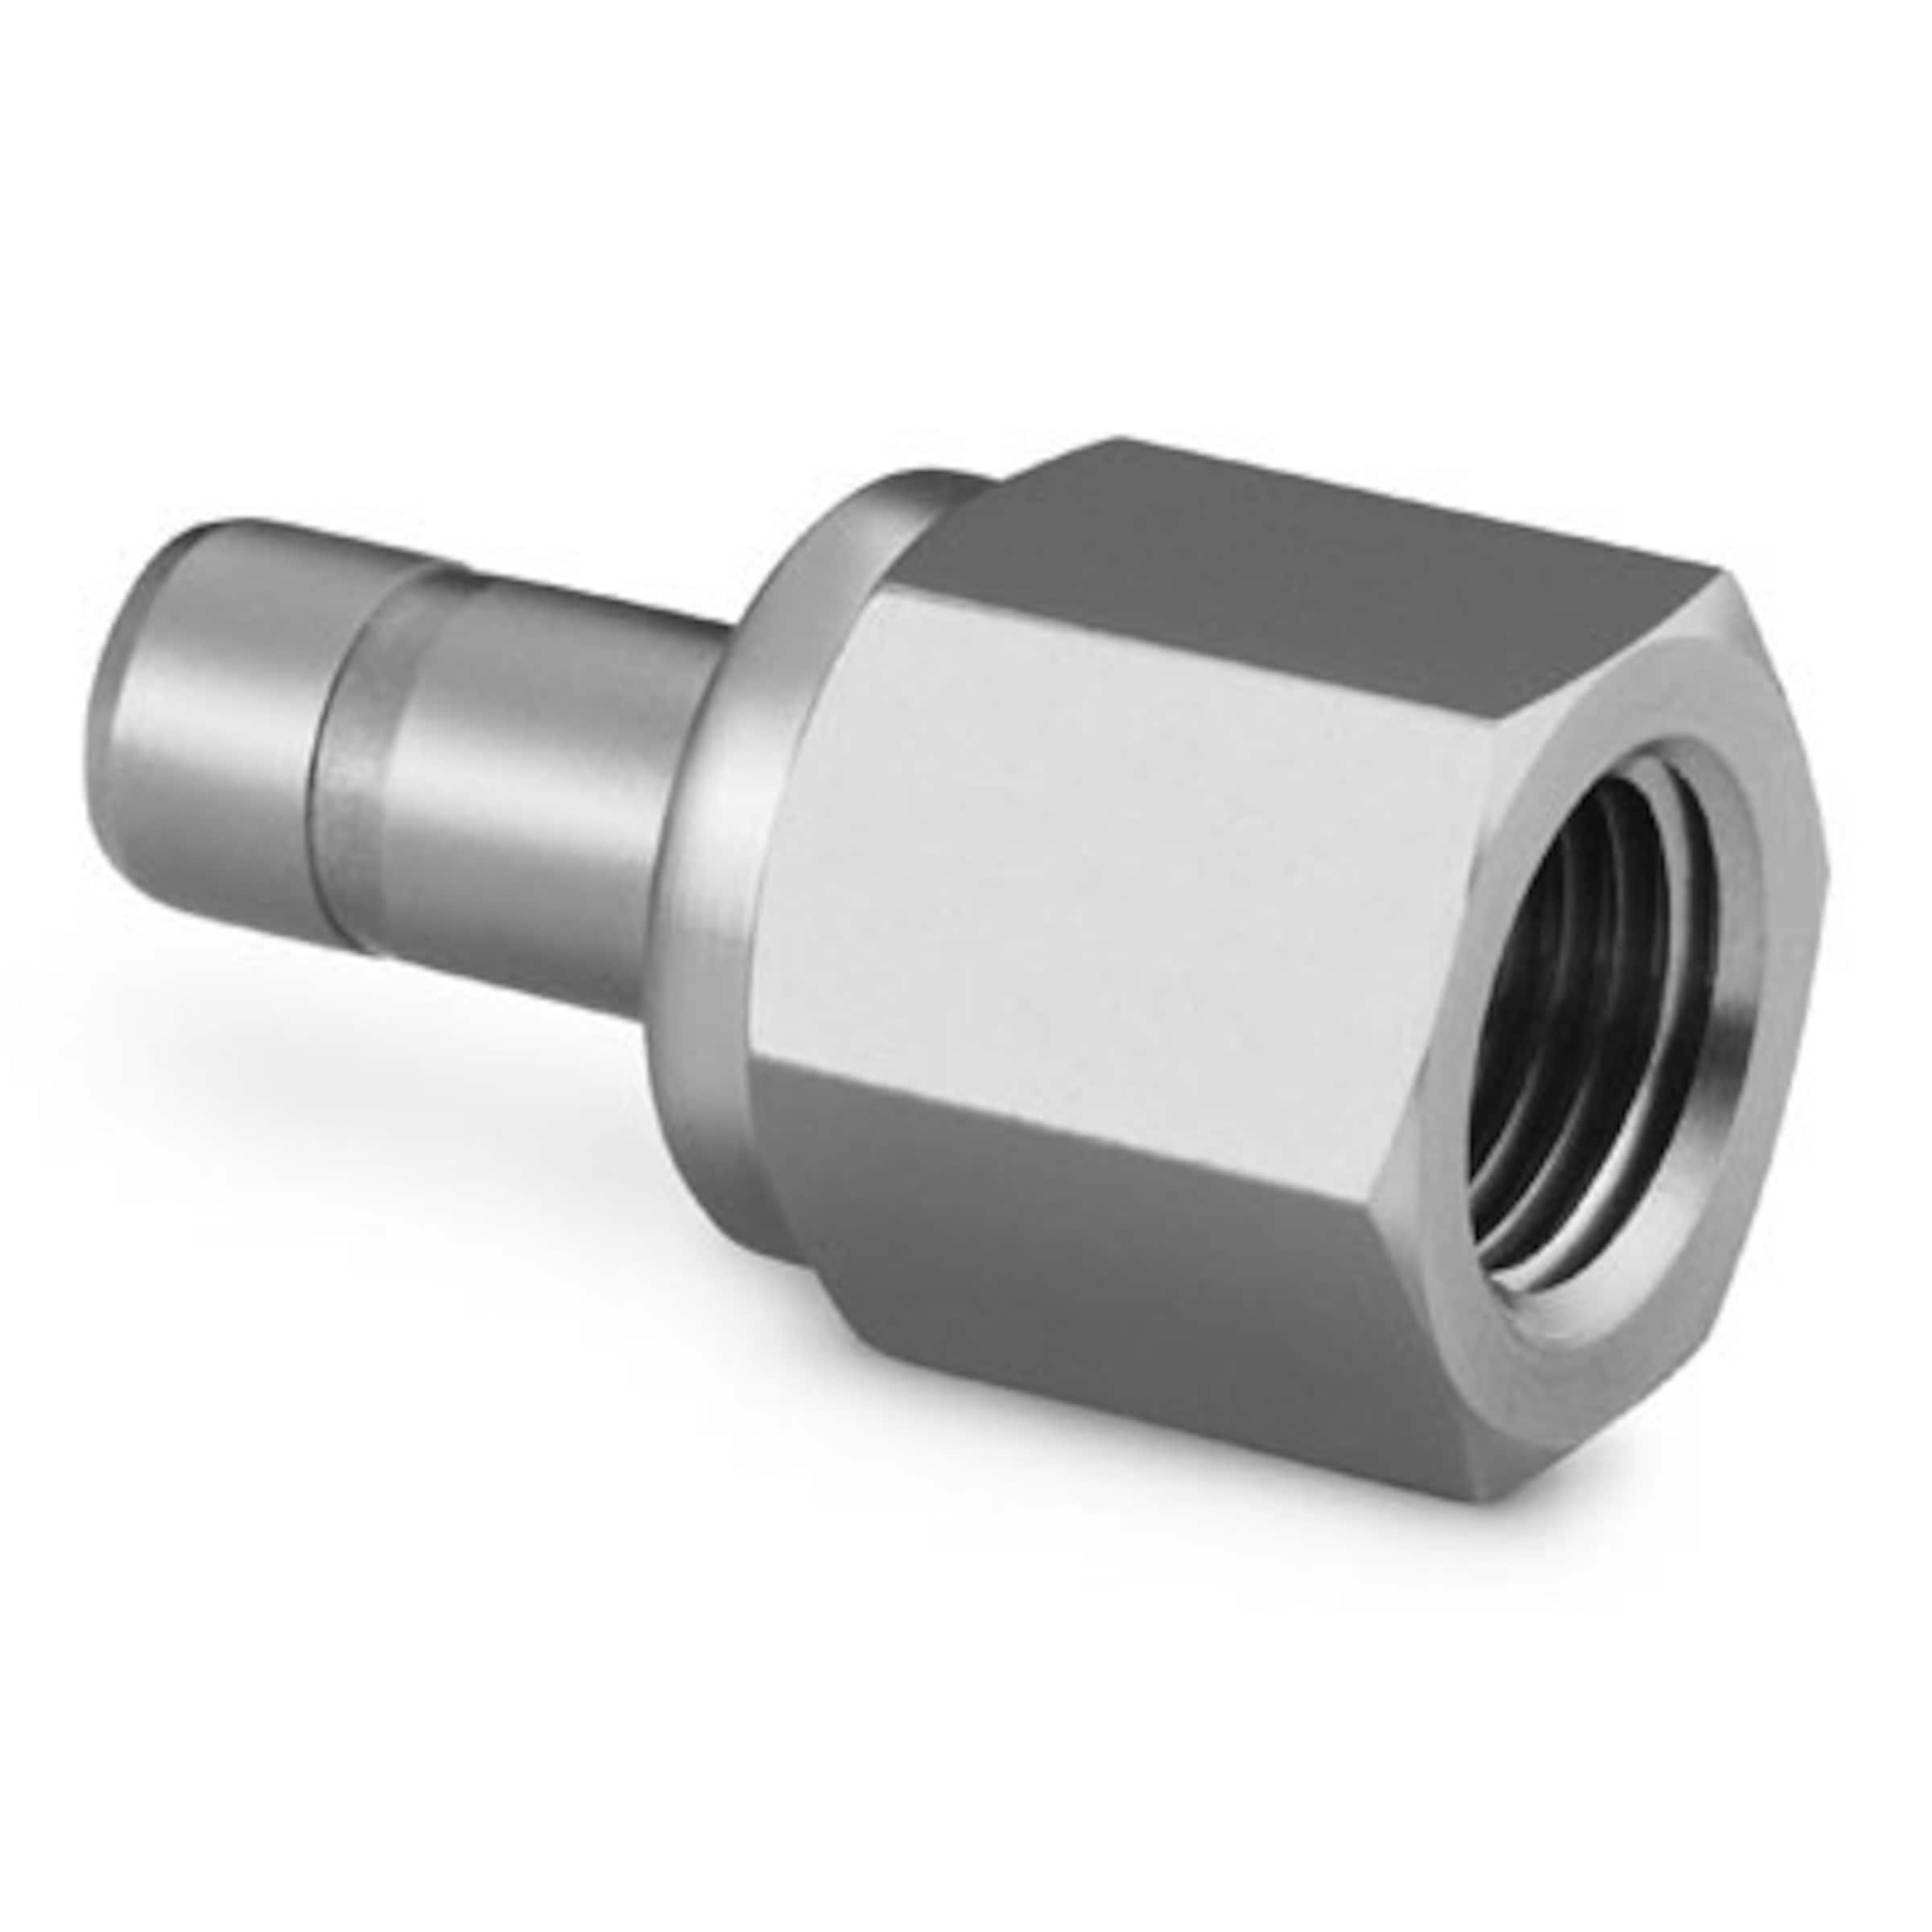 1/4 in. Tube OD x 3/8 in. Tube Stub OD - Reducer Tube Stub Connector -  Double Ferrule - 316 Stainless Steel Compression Tube Fitting